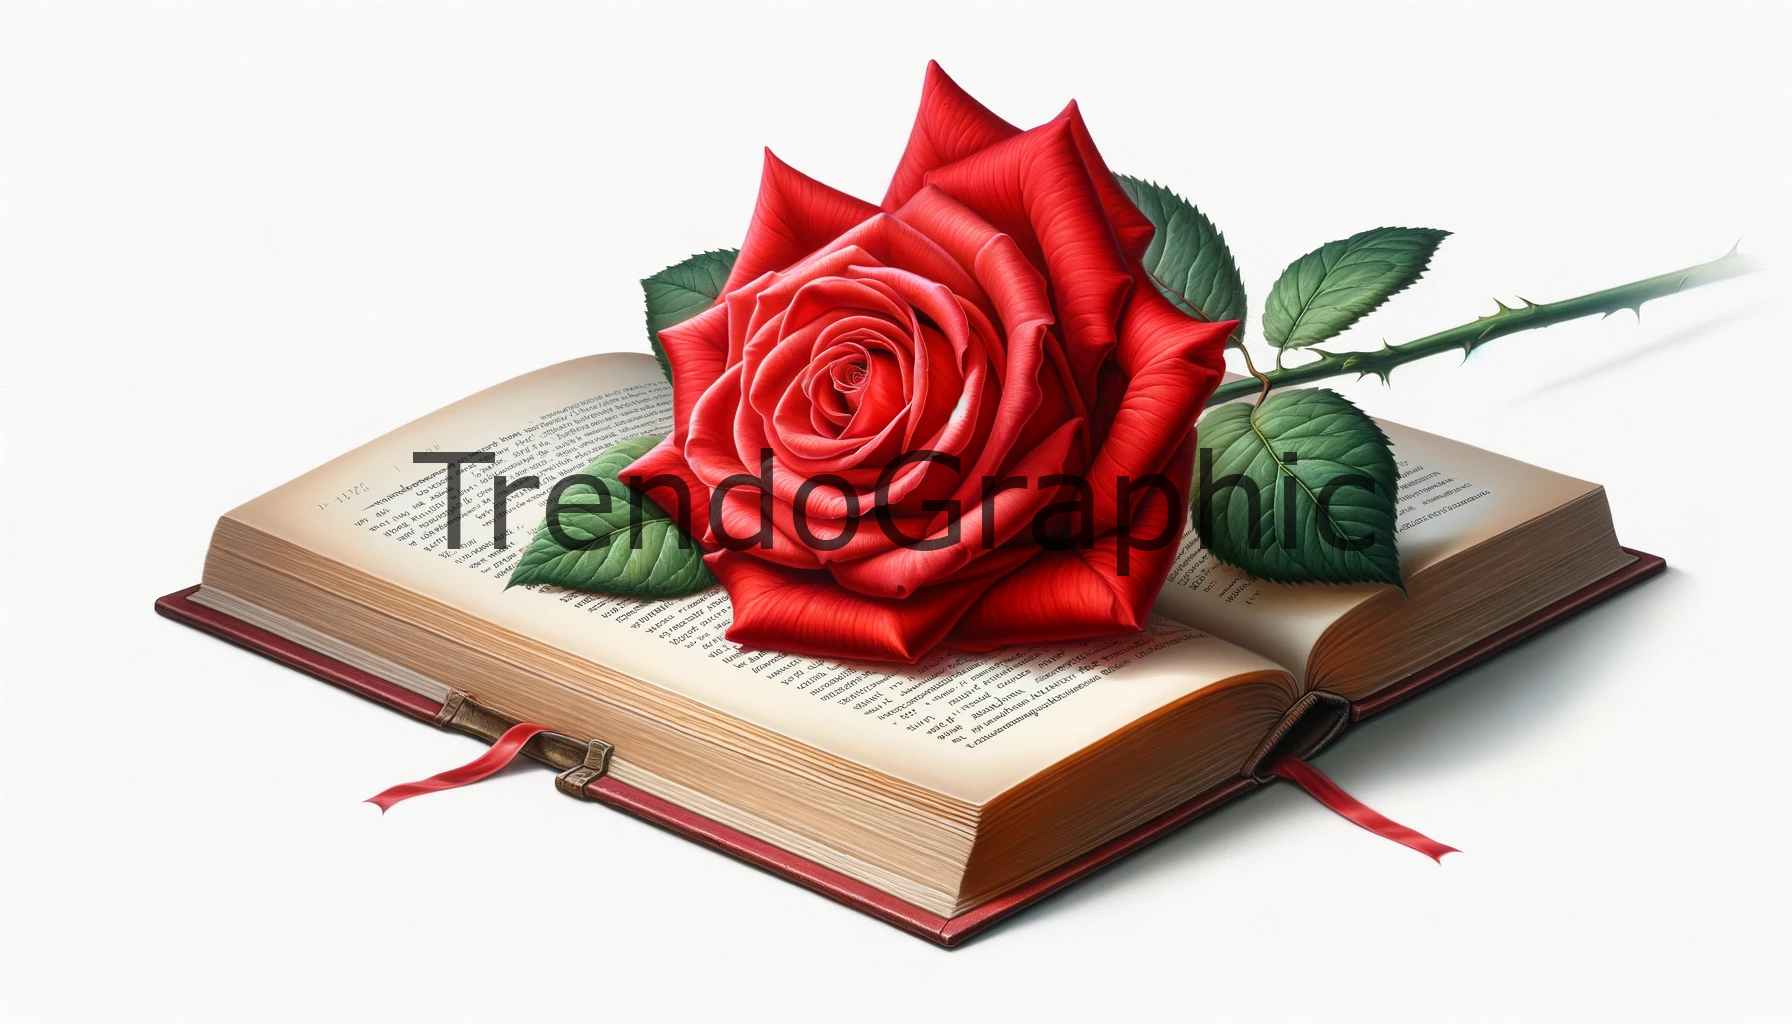 Eloquent Bloom: A Red Rose on Timeless Pages